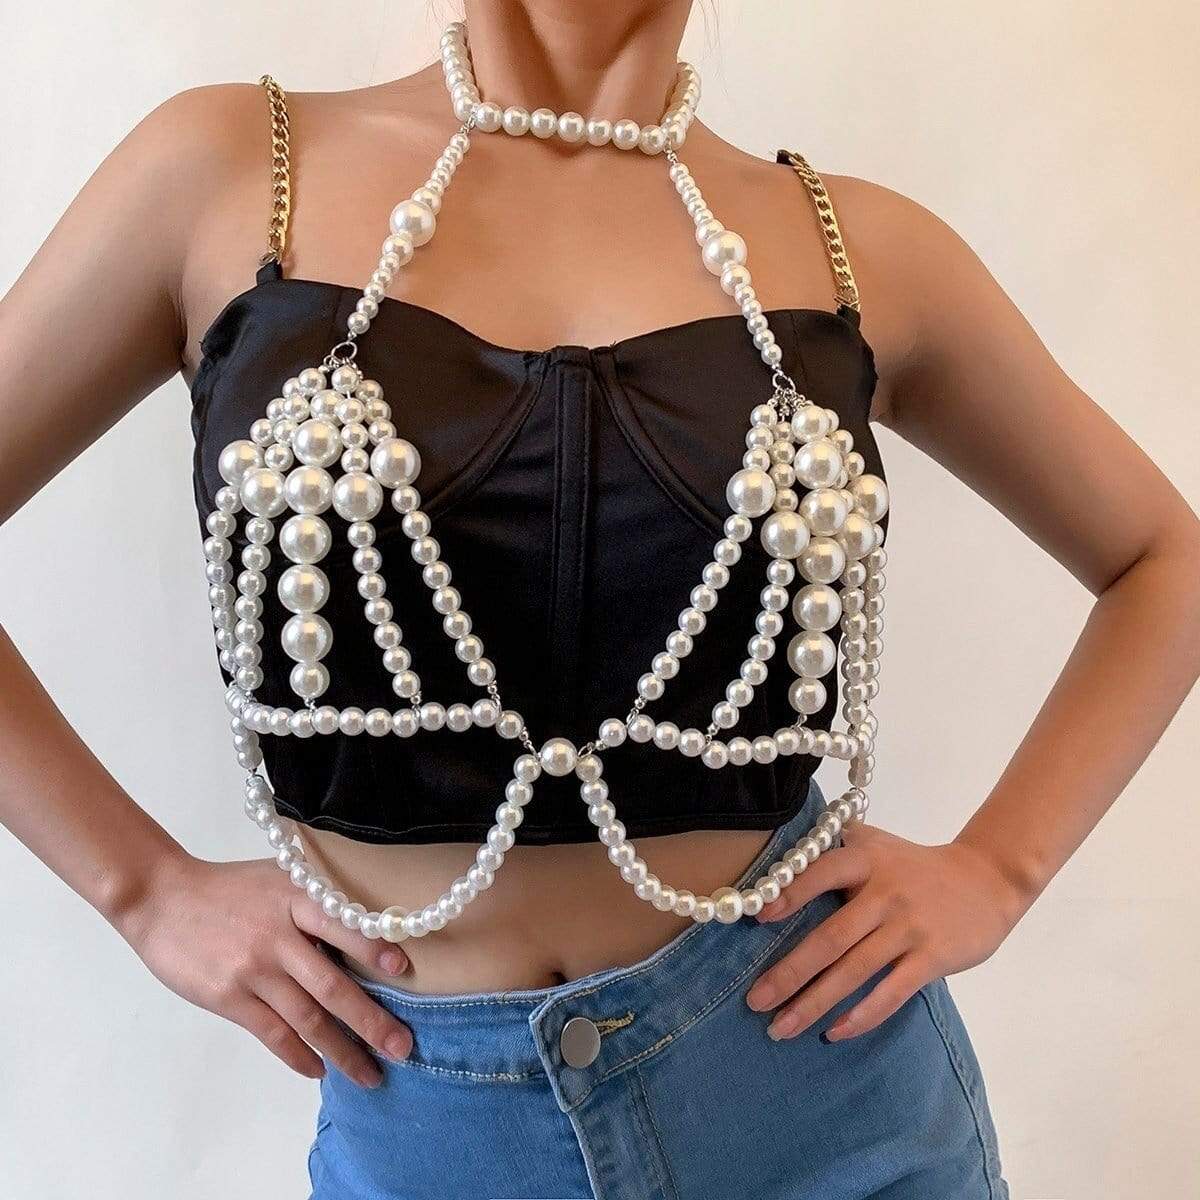  Pearl Body Chain Necklace for Women - Adjustable Size Fashion  Handmade Pearl Body Chain for Party : Clothing, Shoes & Jewelry